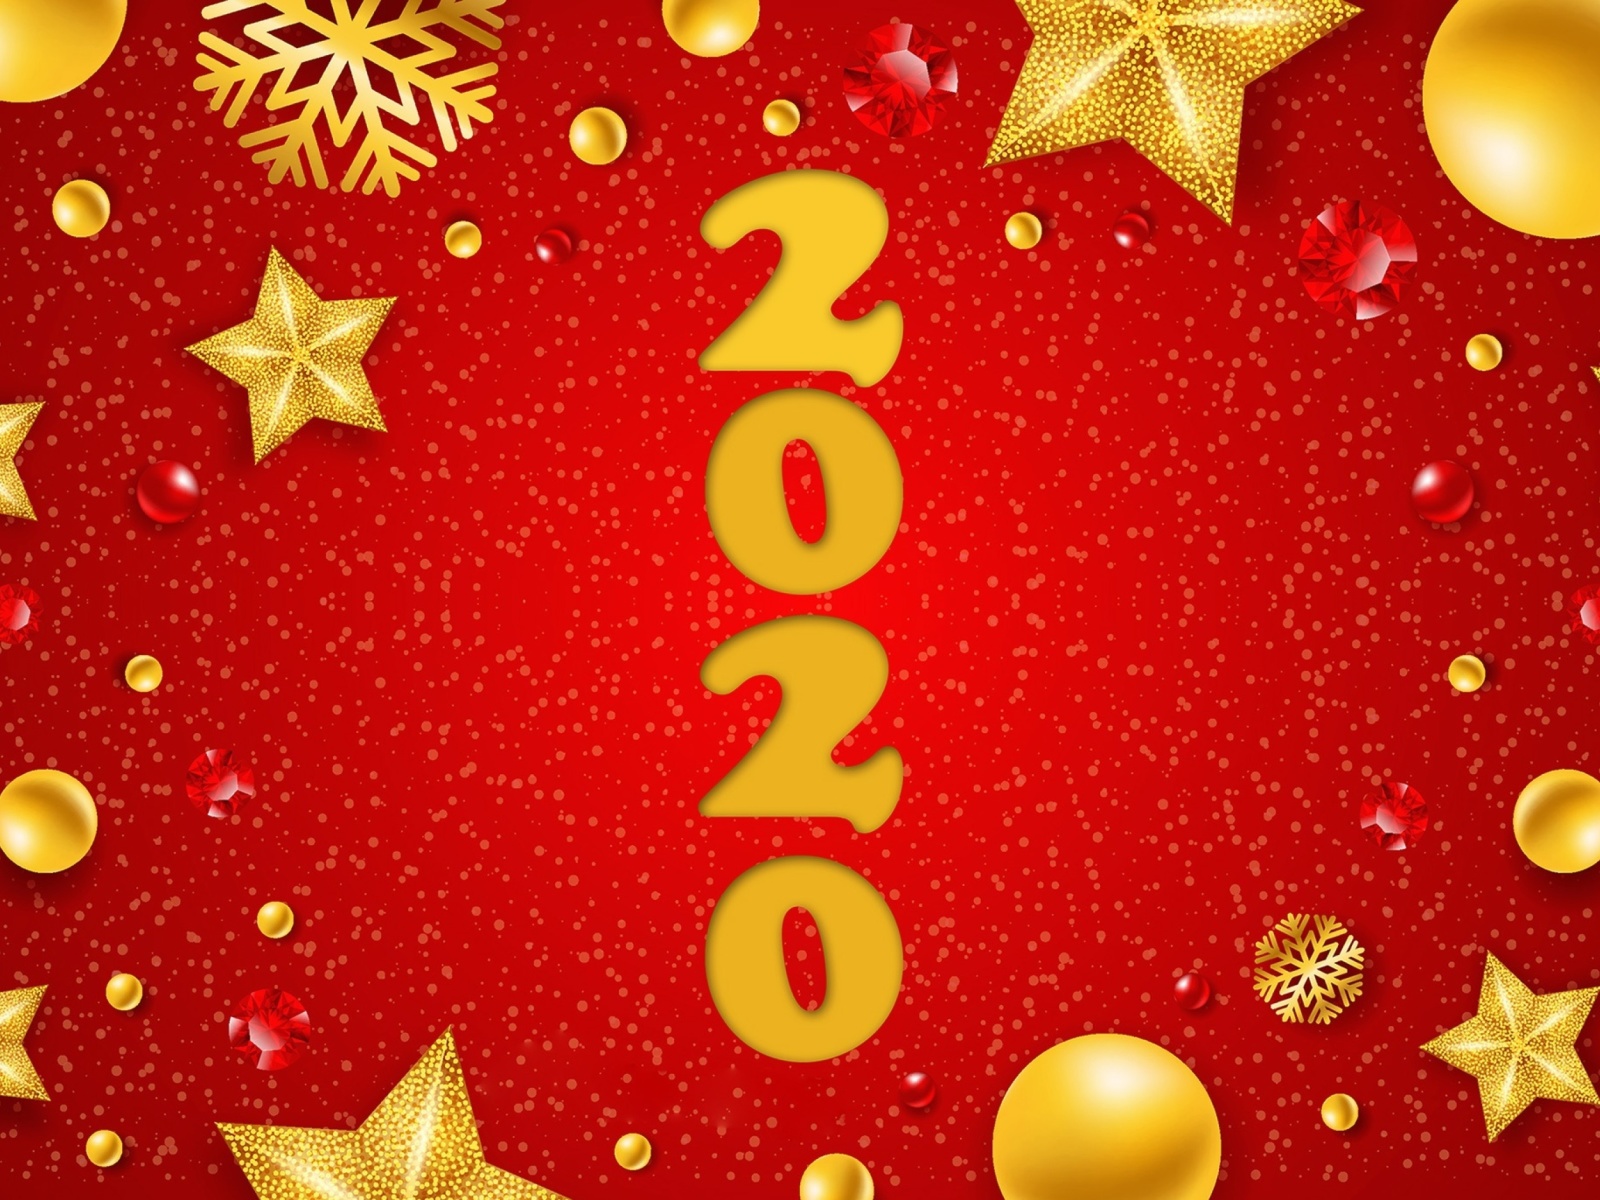 Happy New Year 2020 Messages wallpaper 1600x1200